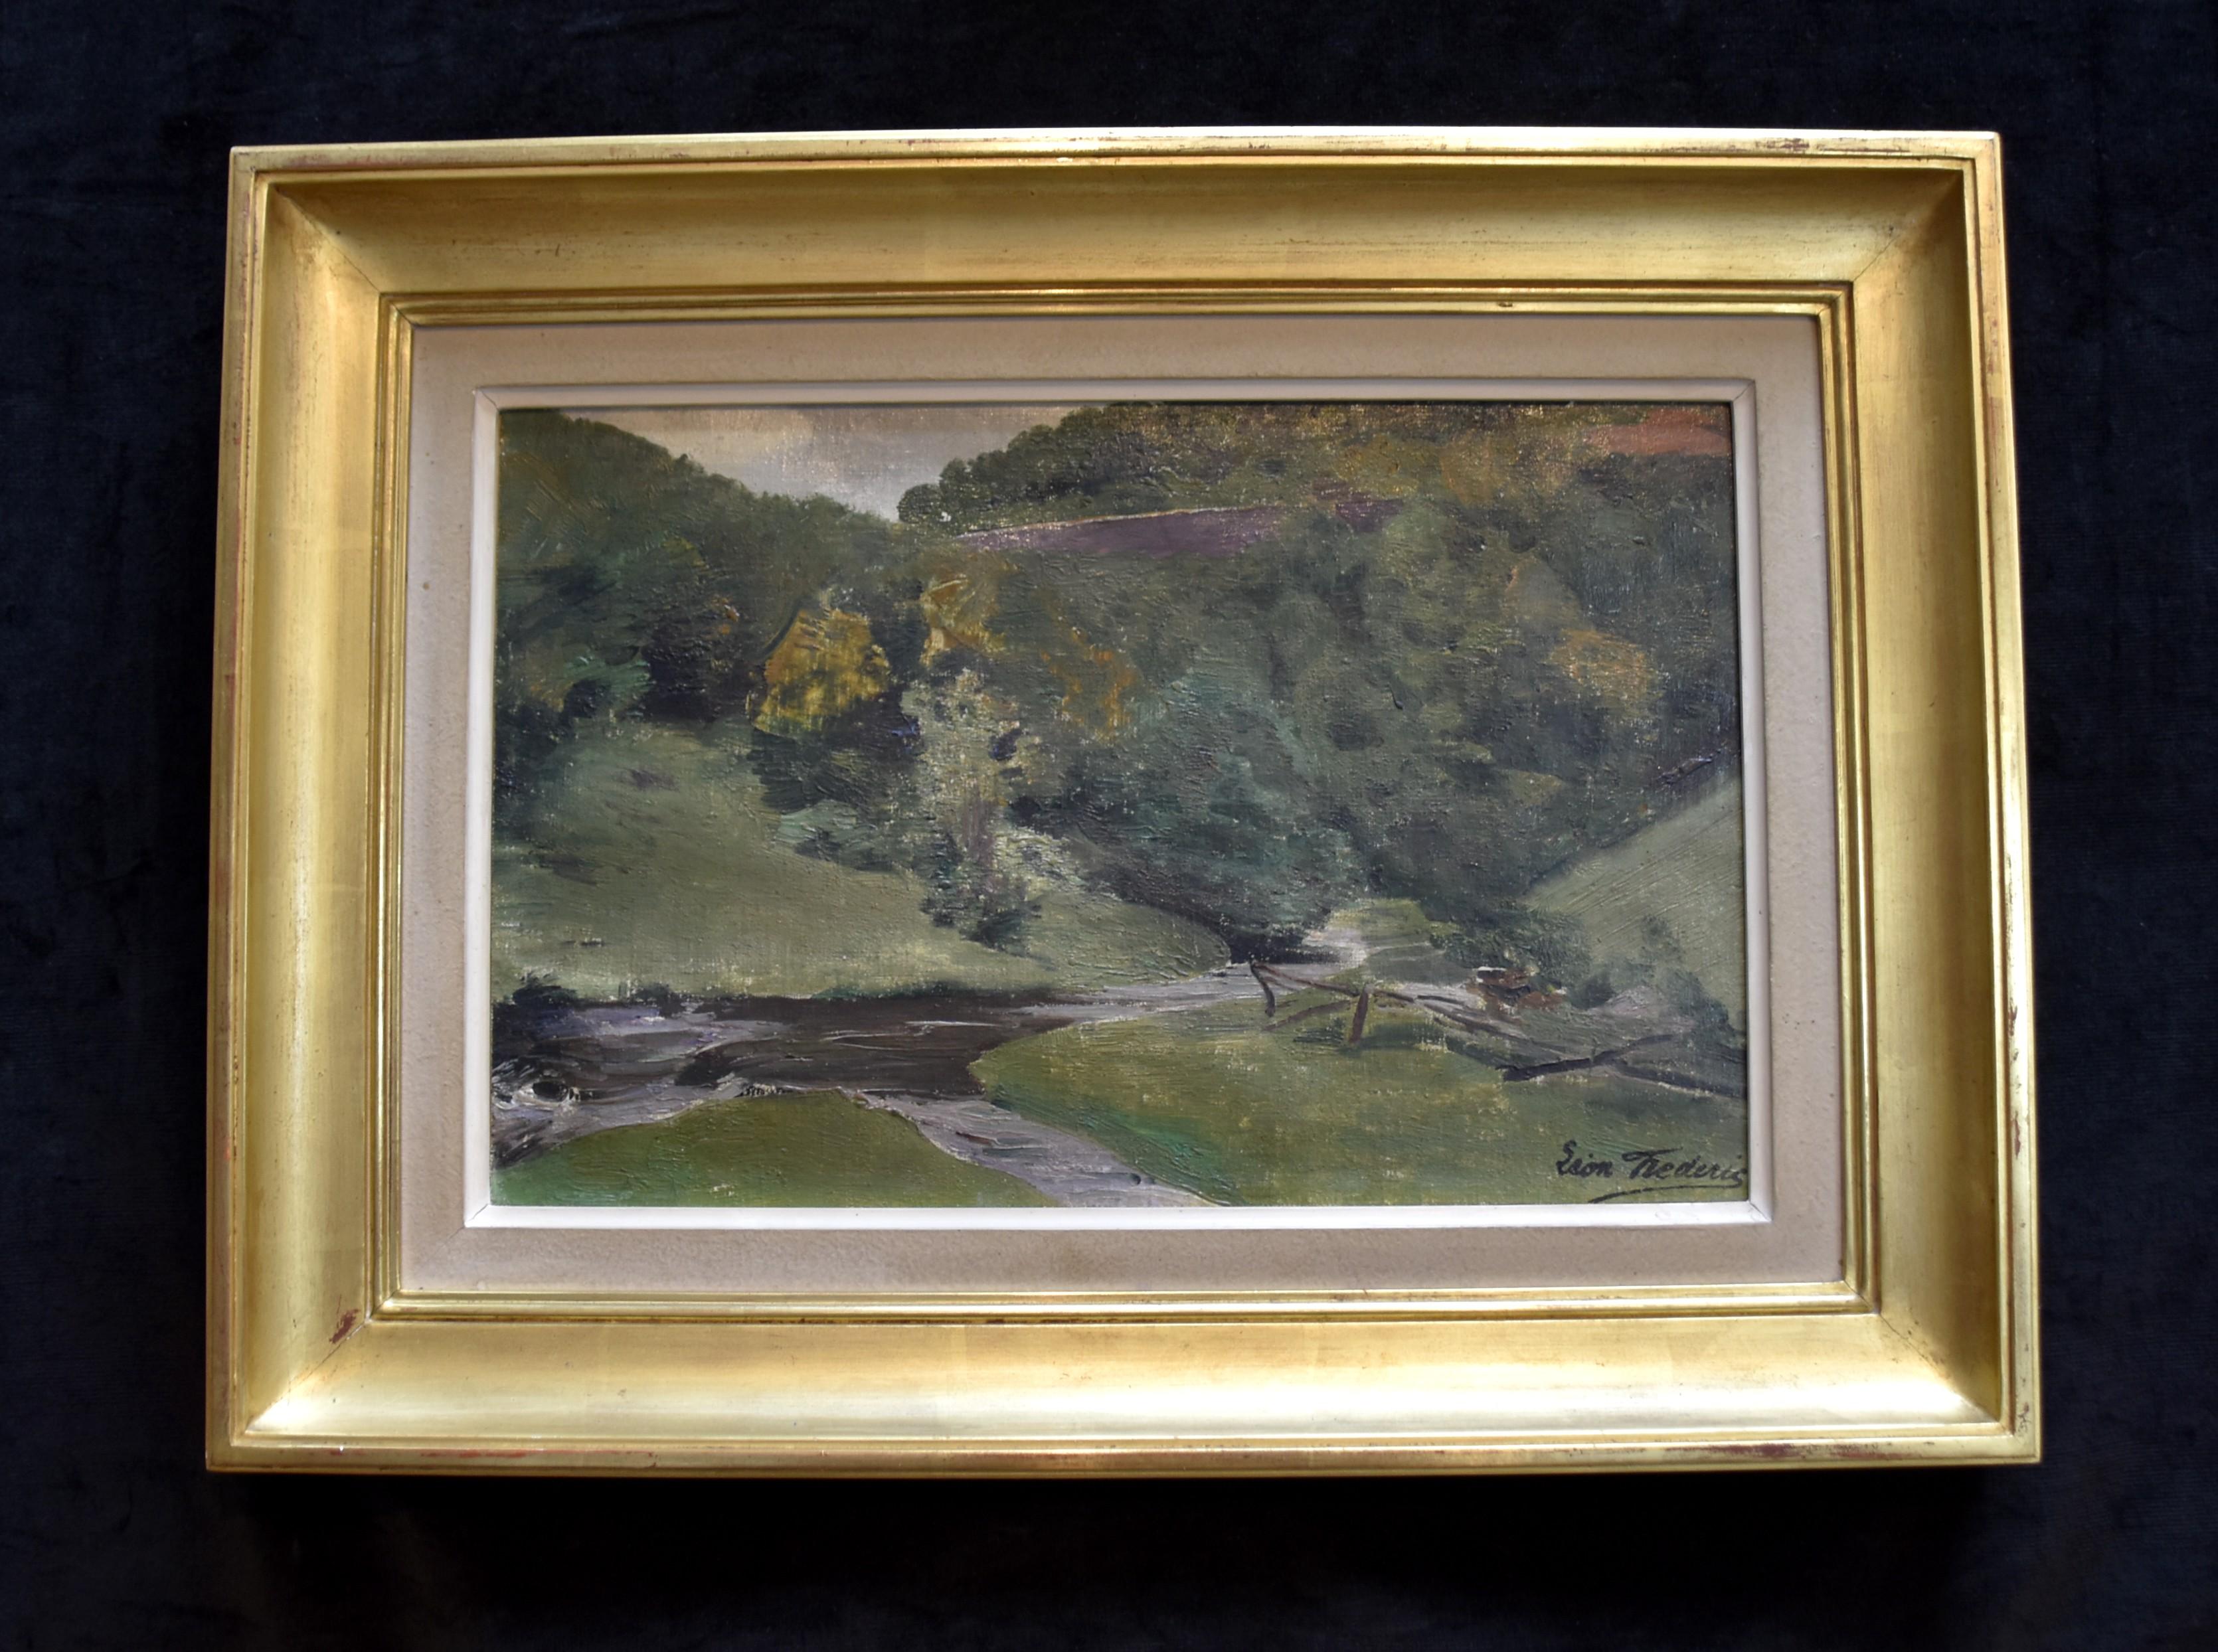 Léon Frédéric (1856-1940) 
Landscape in Nafraiture
Signed with the signature stamp of his estate on the lower right
Oil on canvas
21 x 32 cm
Certificate of Georges Frederic, son of the artist, on the reverse of the canvas 
Original Frame  : 33 x 45